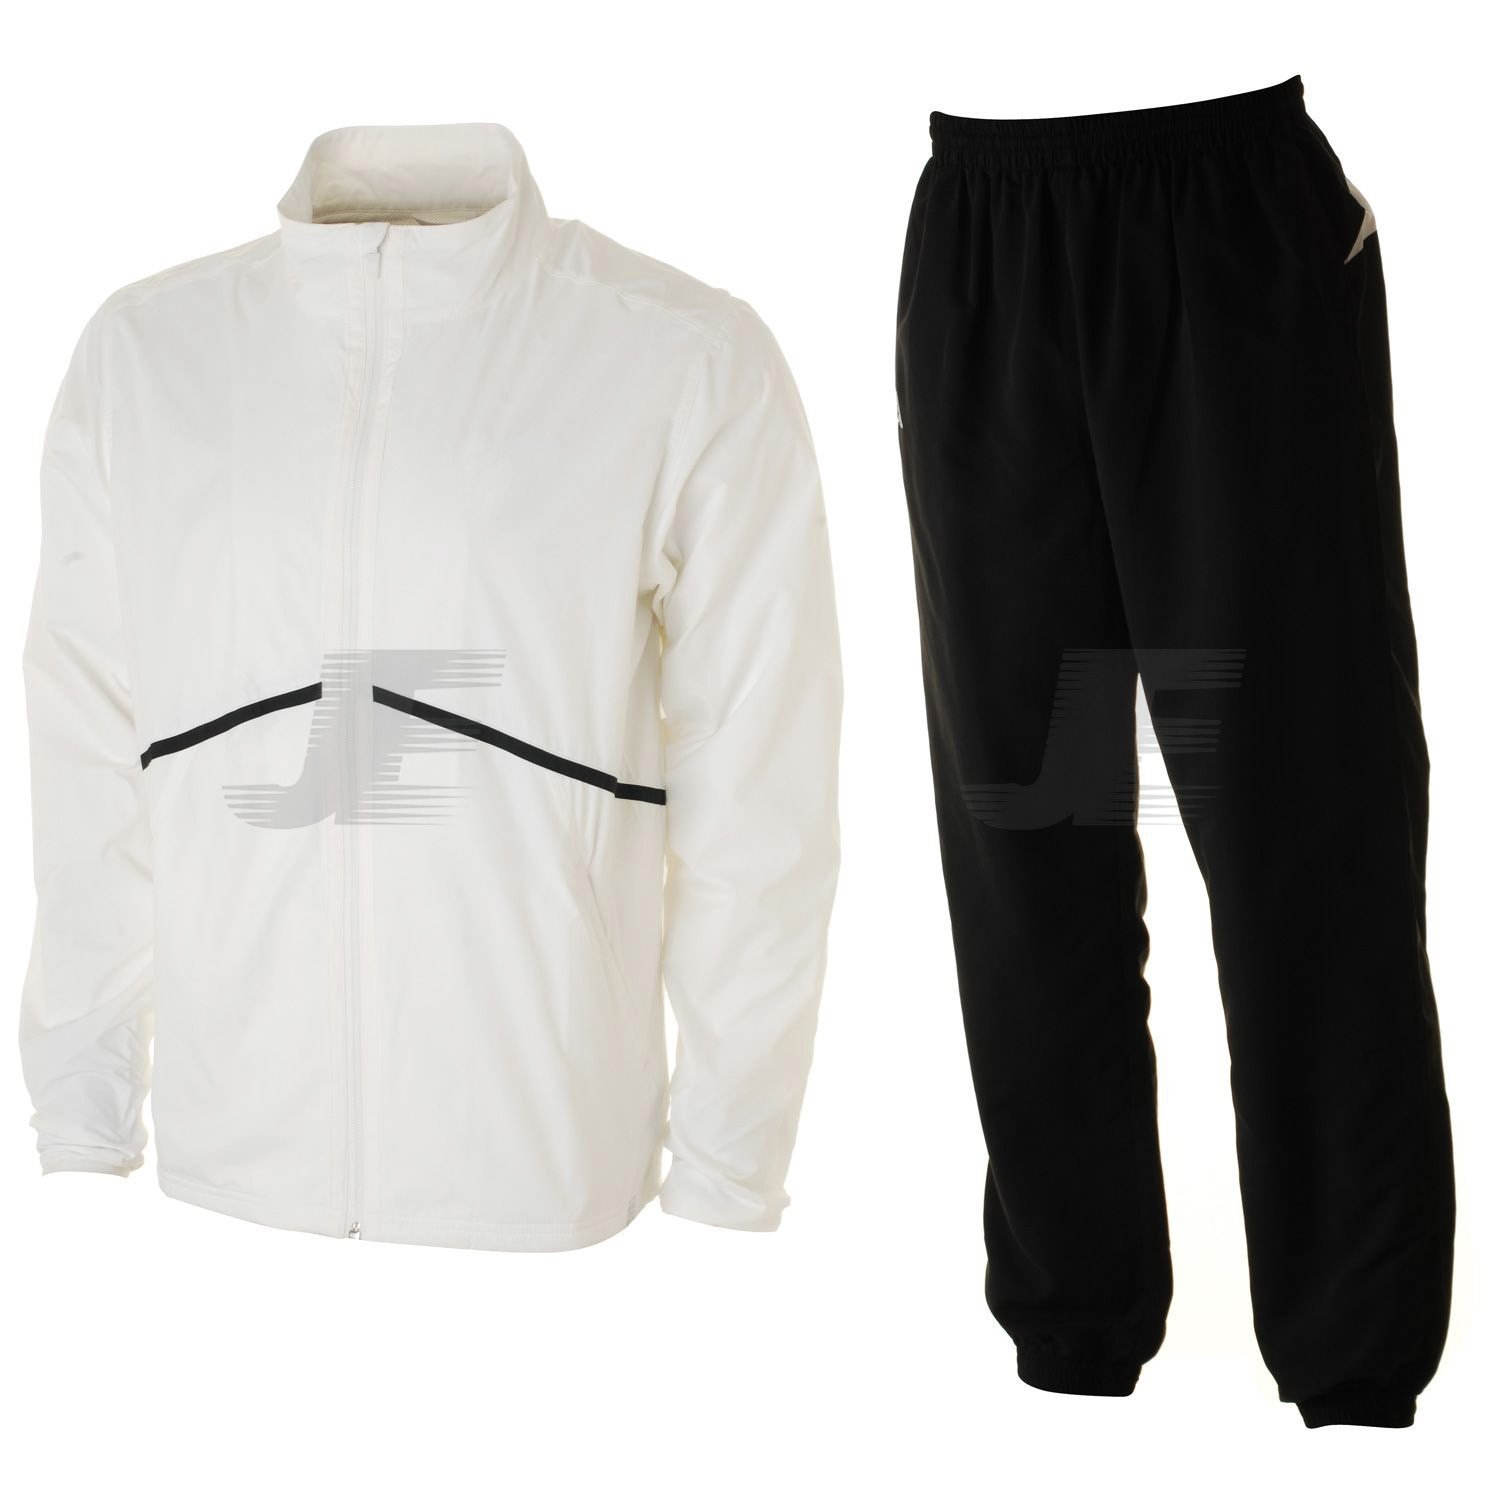 White & Black Two Tone Zip Up Jogging Track Suit